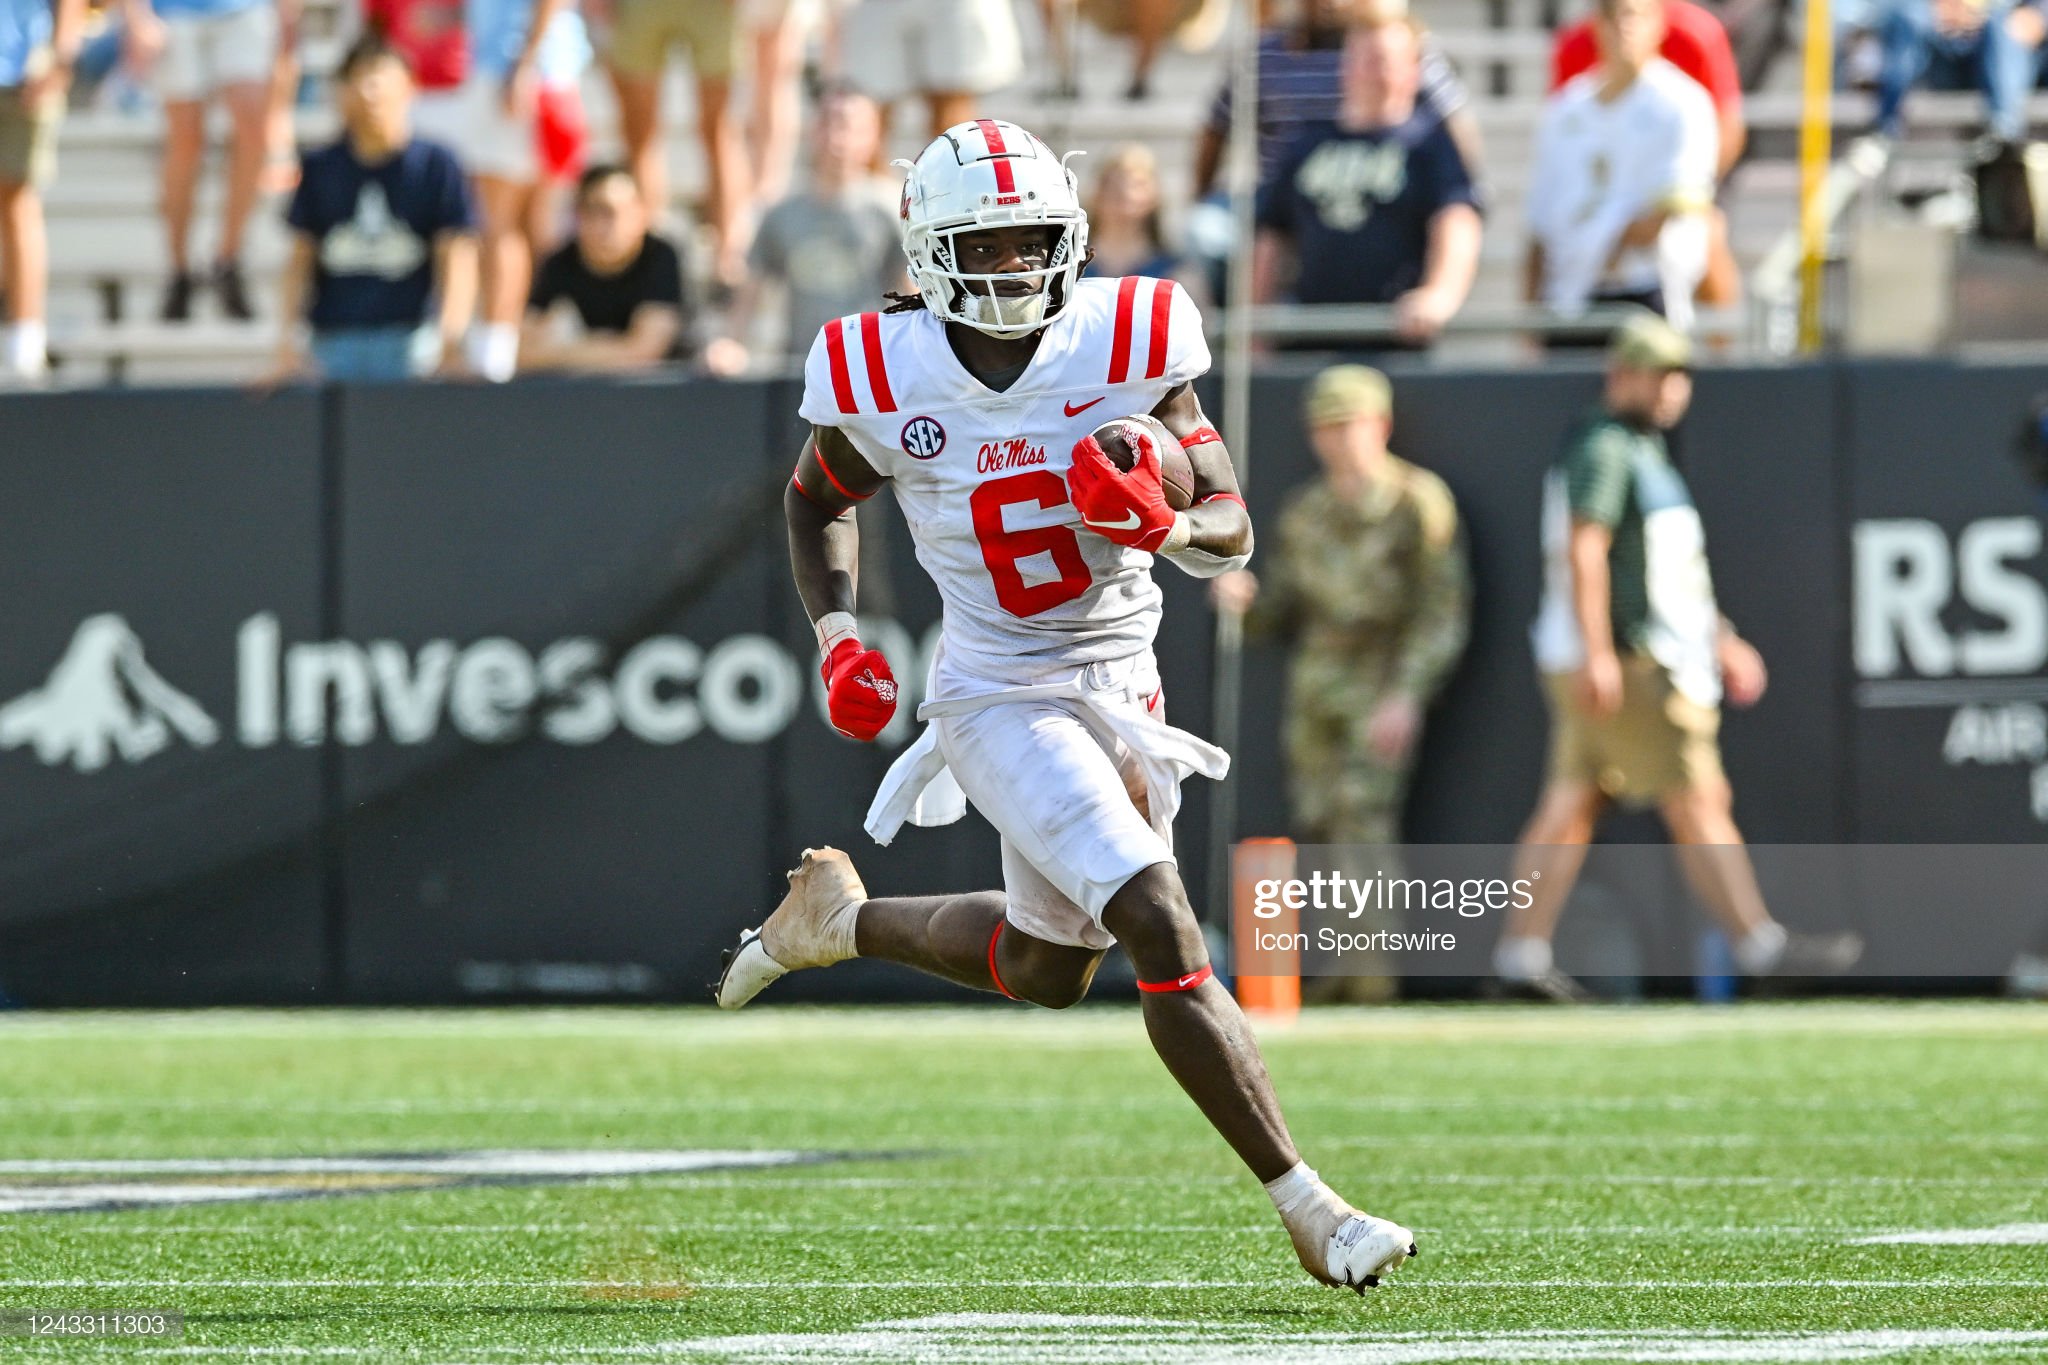 2023 NFL Draft Scouting Report: RB Zach Evans, Ole Miss